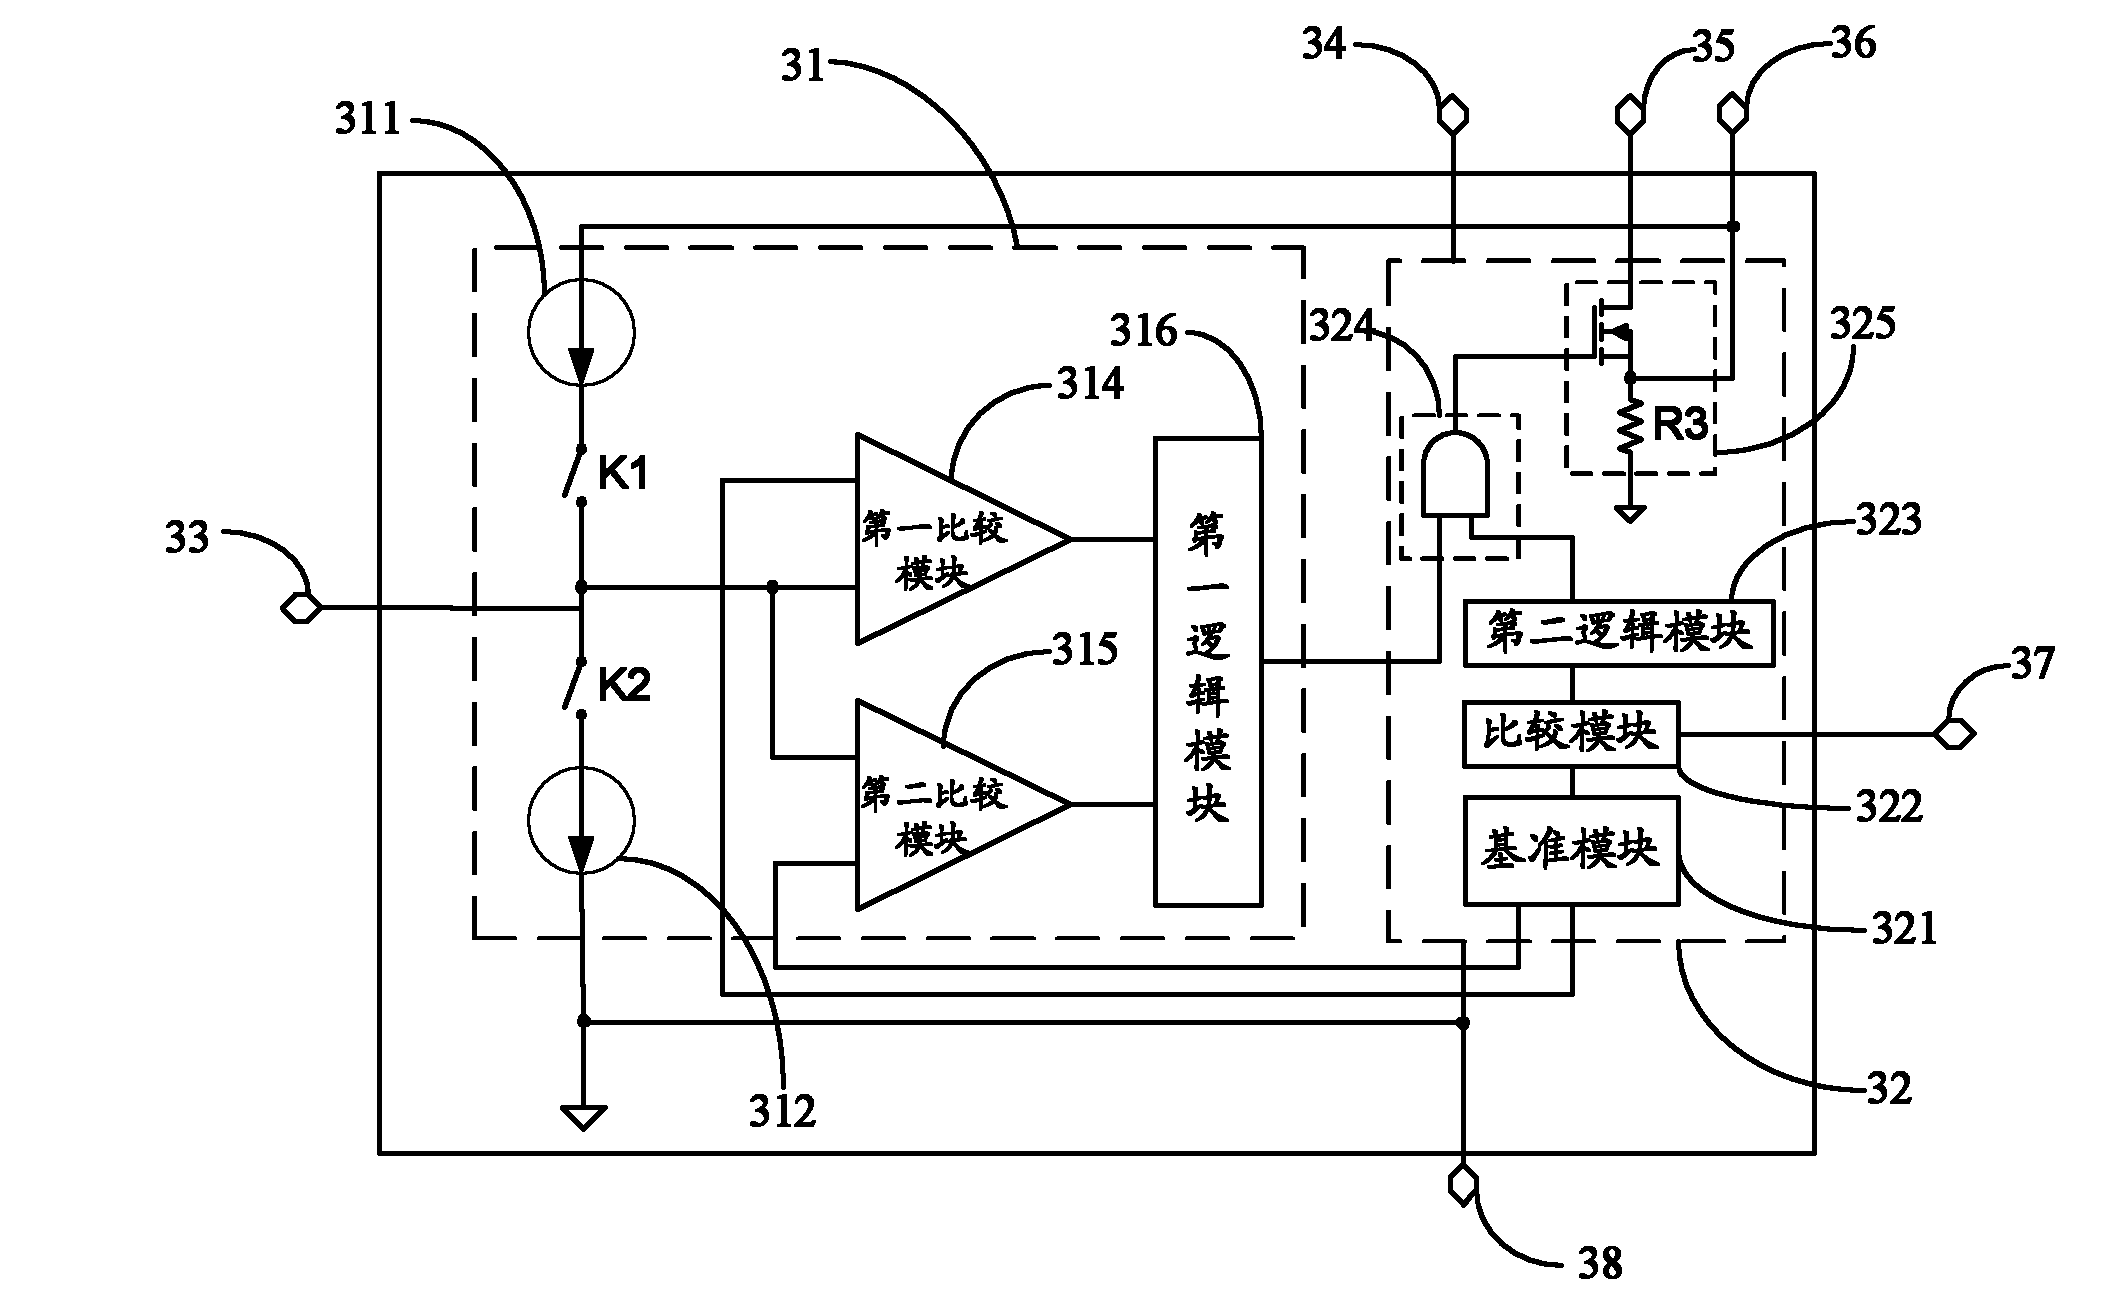 A cycle control wled drive chip and drive circuit